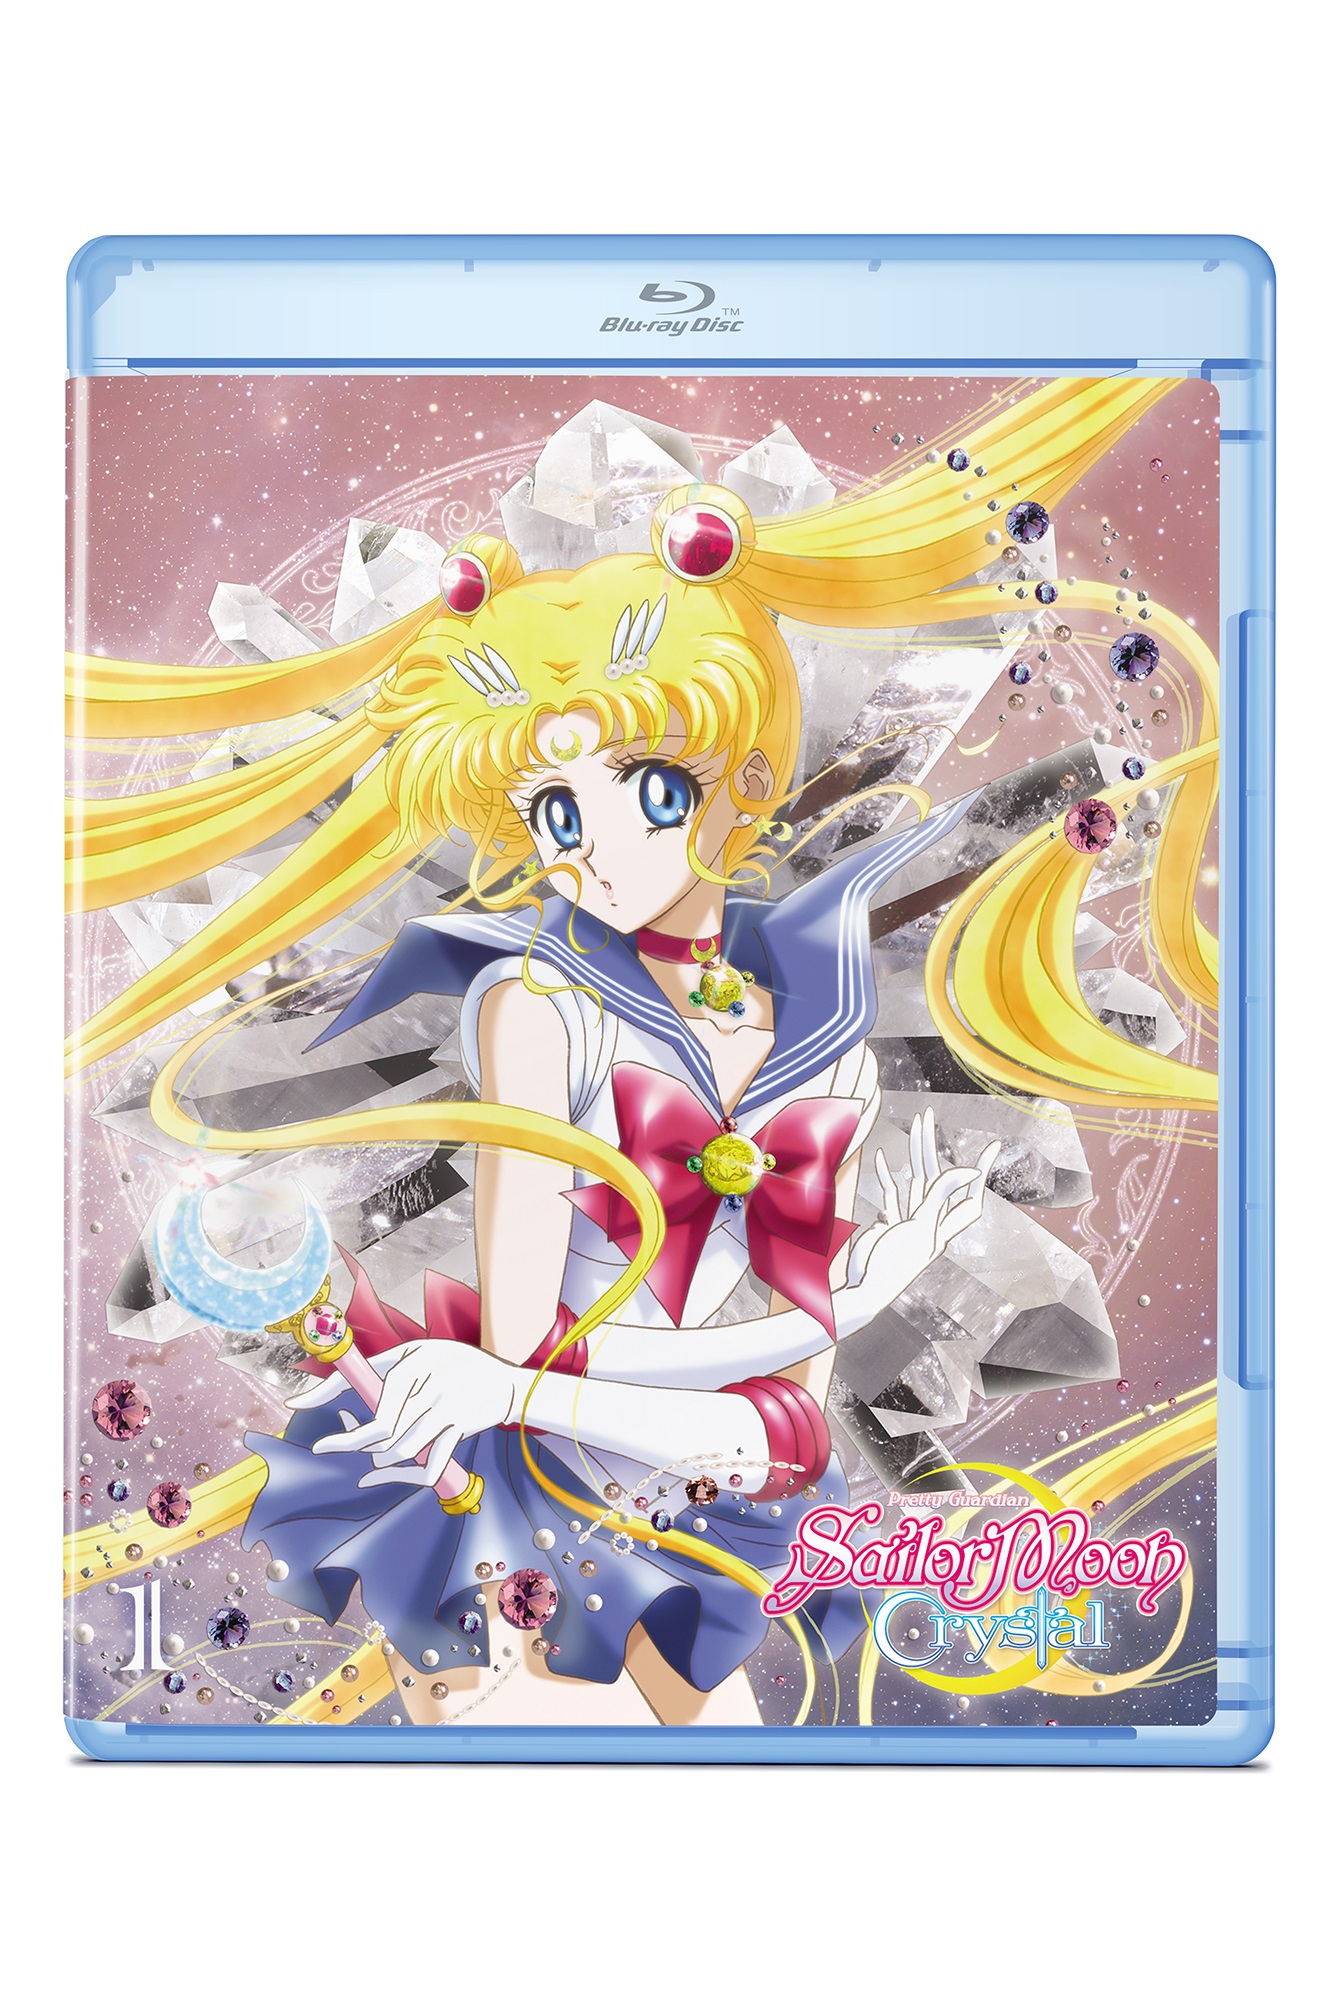 Sailor Moon Crystal Set 1 Limited Edition Blu-ray/DVD image count 2